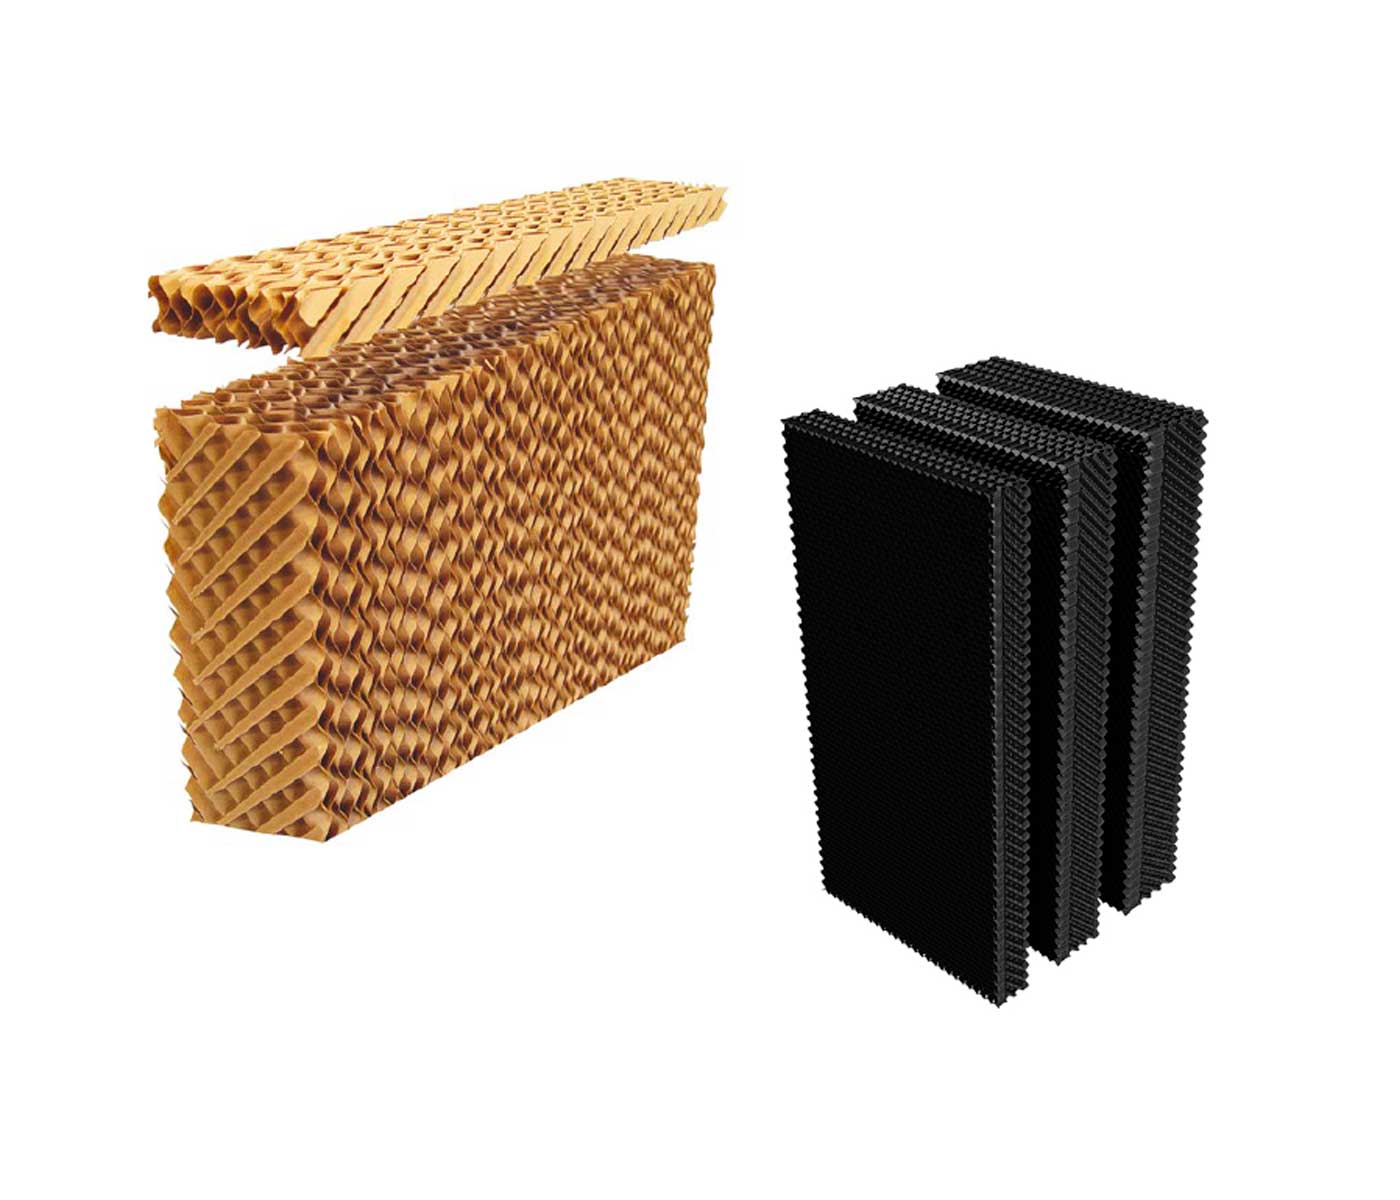 Cellulose or plastic cooling panels? How to make the best choice?